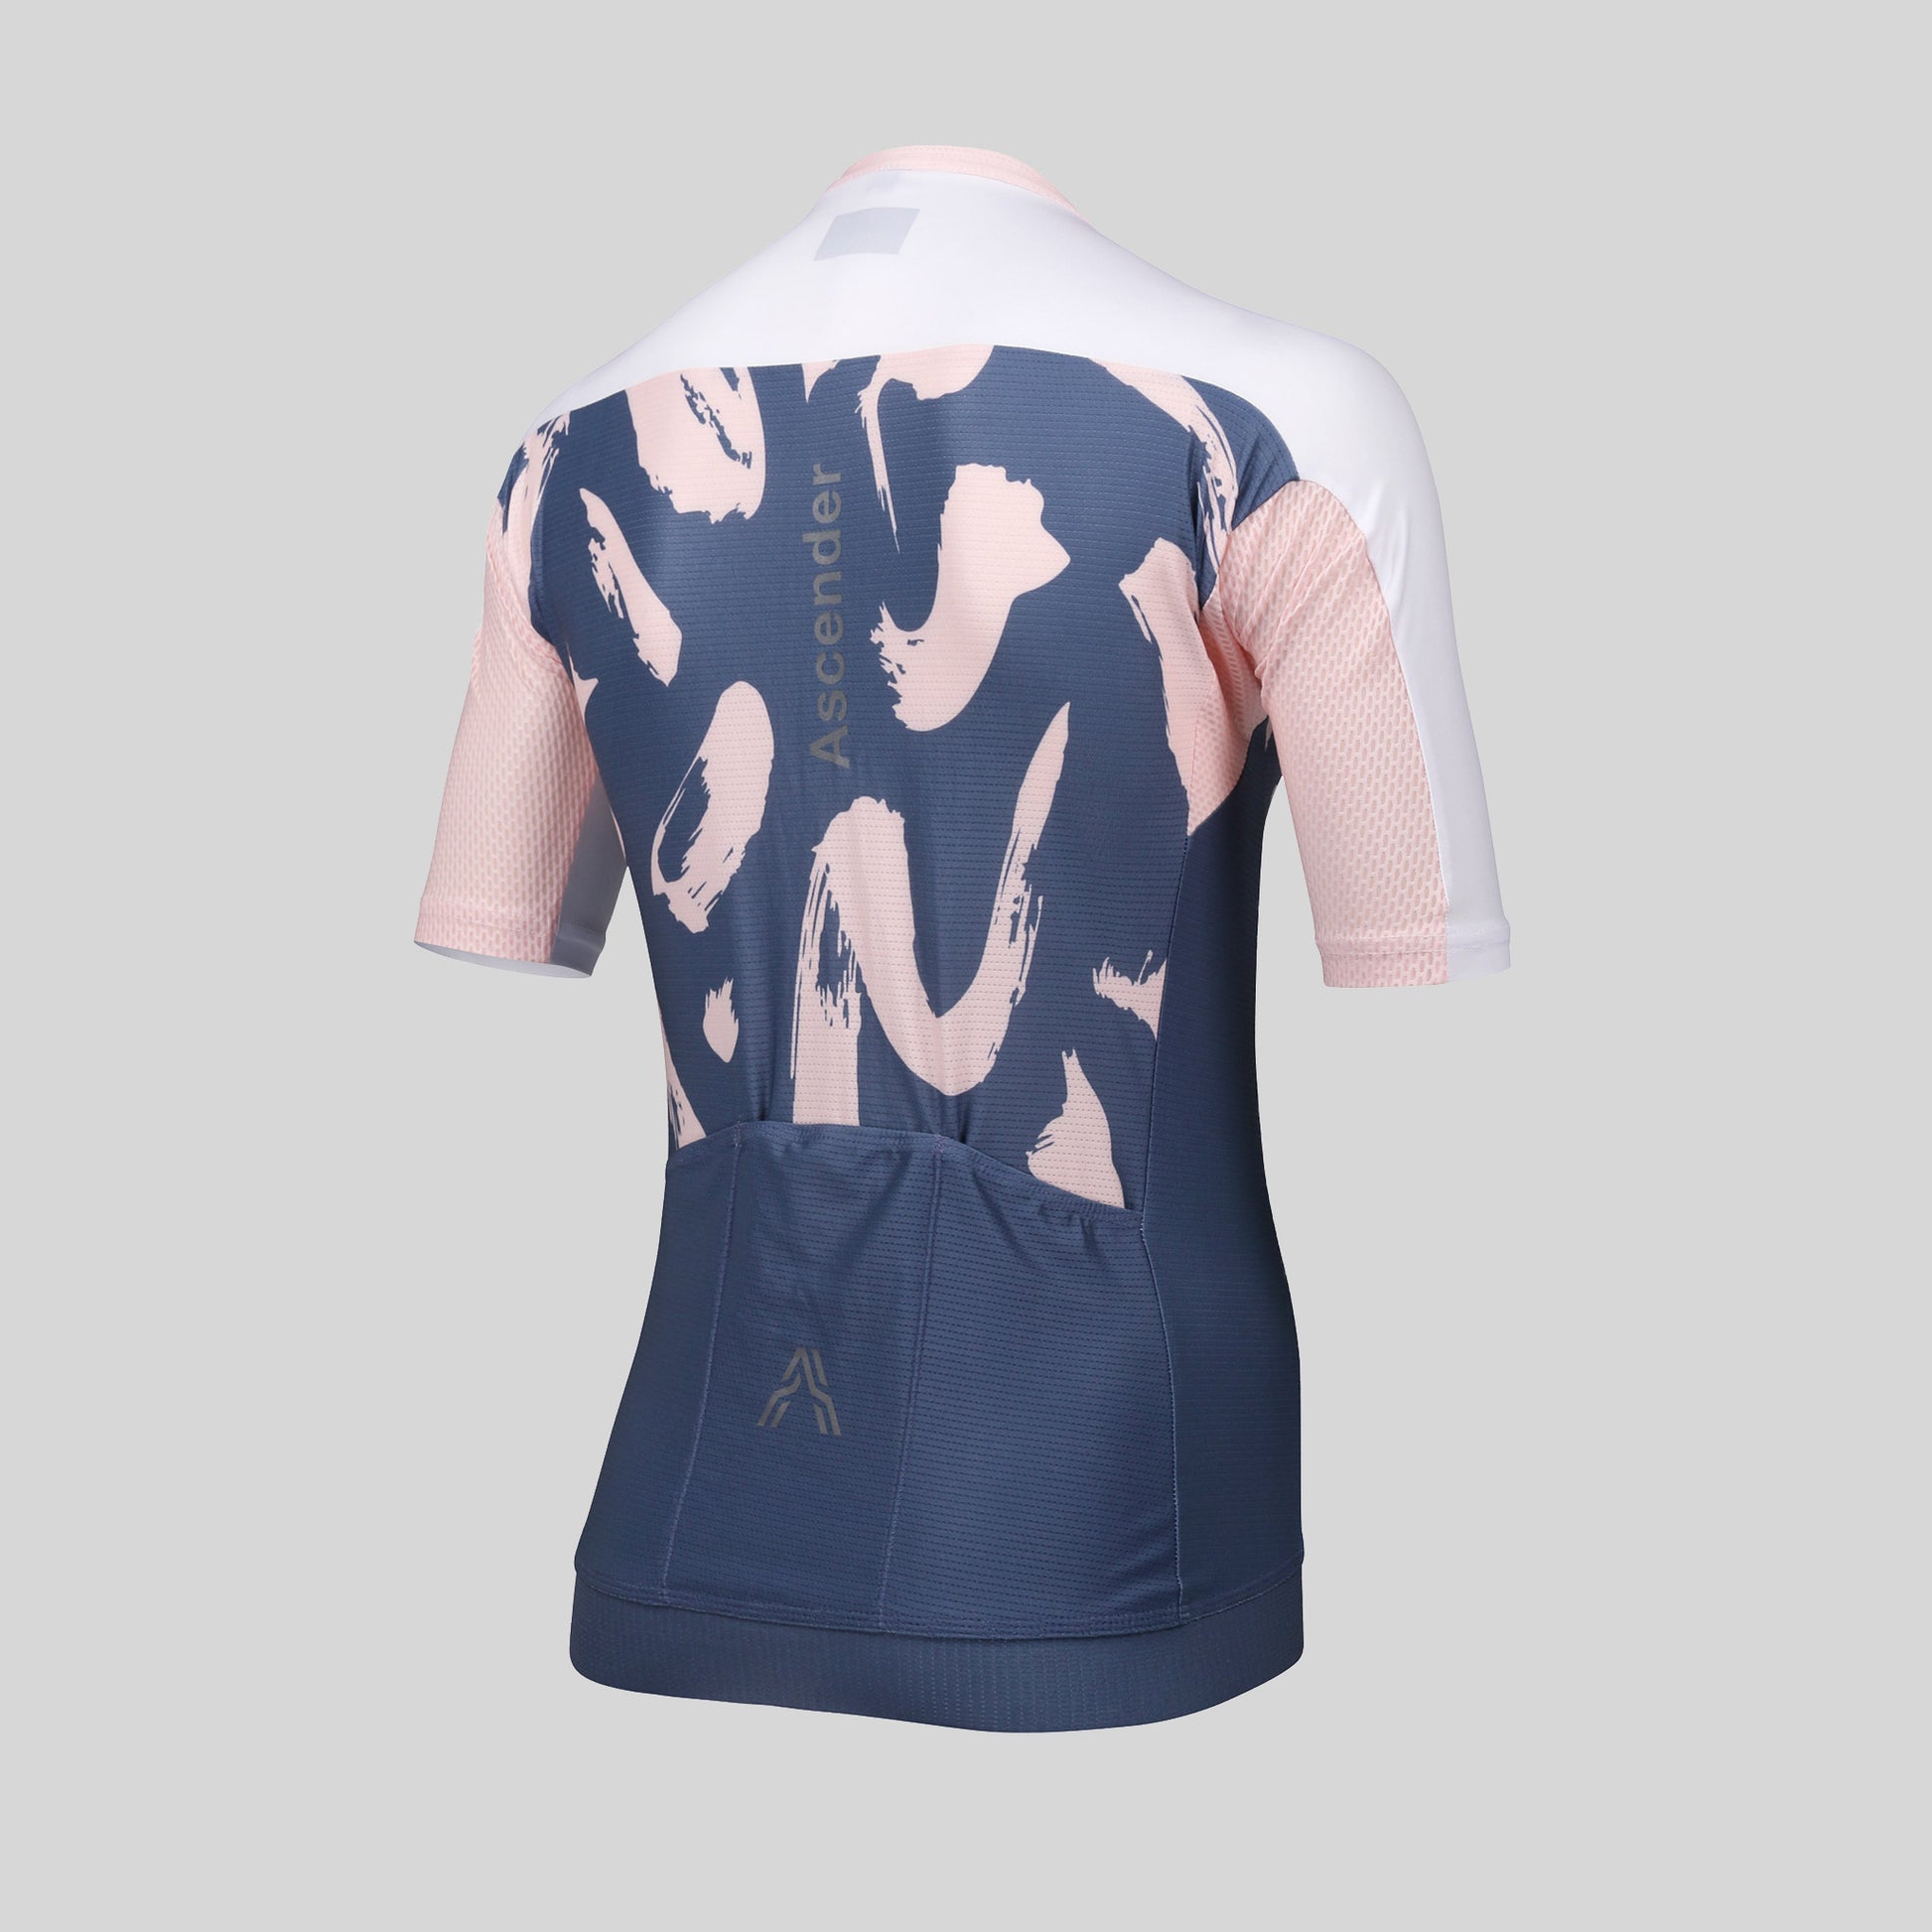 Yukimi Short Sleeve Jersey for Women by Ascender Cycling Club in Zürich Switzerland Picture Backside Global with Reflective Logo